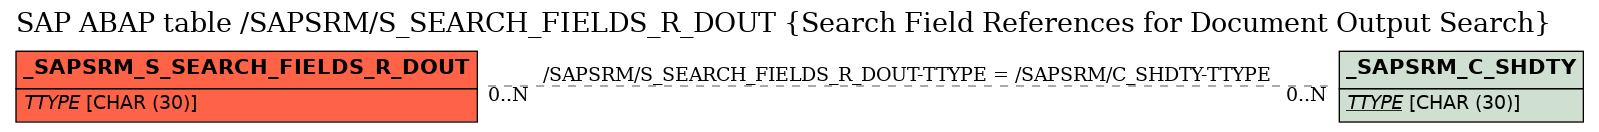 E-R Diagram for table /SAPSRM/S_SEARCH_FIELDS_R_DOUT (Search Field References for Document Output Search)